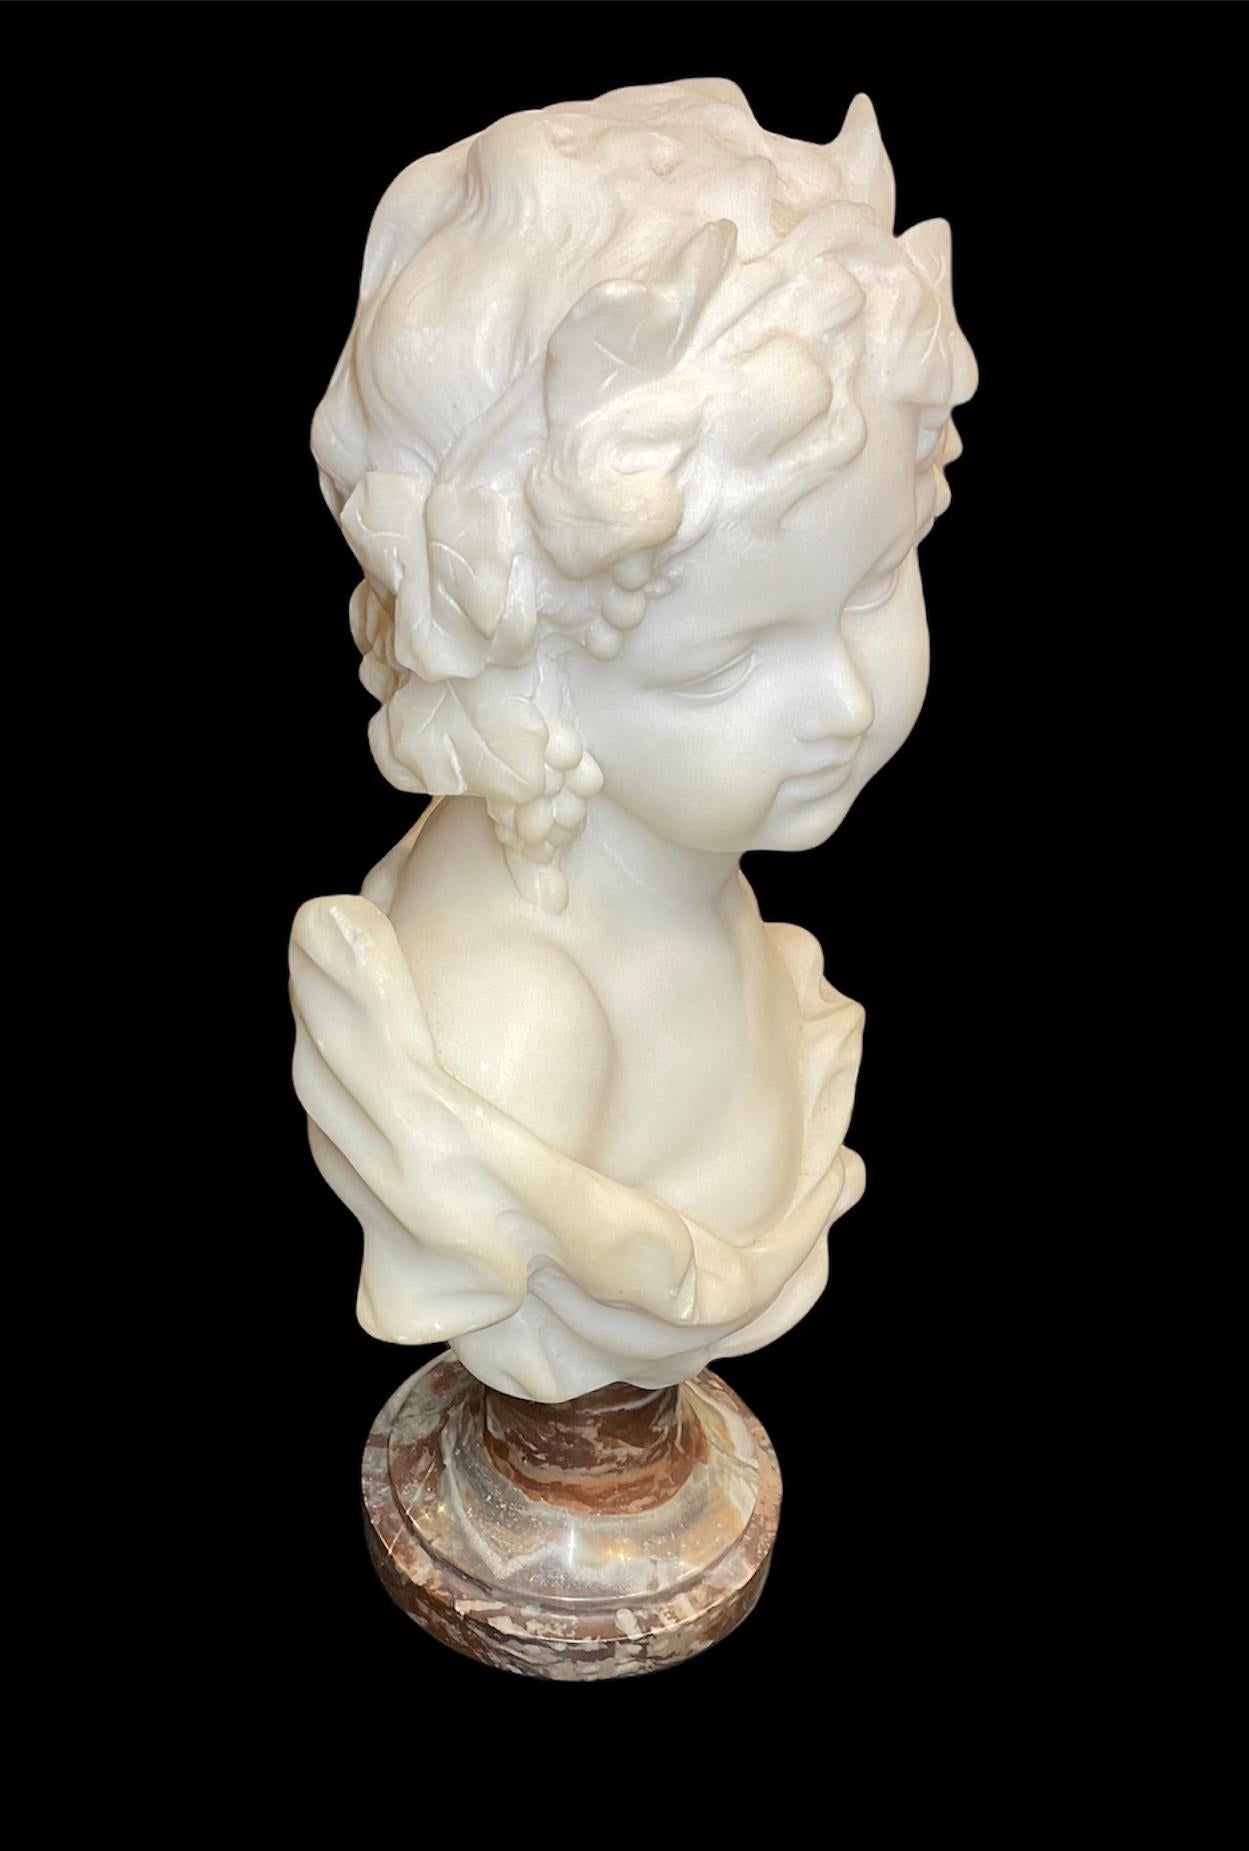 This a white marble bust of the Allegory of Autumn. It is depicting a young girl with a very expressive eyes. Her chest Is covered by a robe and her curly hair adorned by leaves and branches of grapes. The bust is attached to a brown round marble